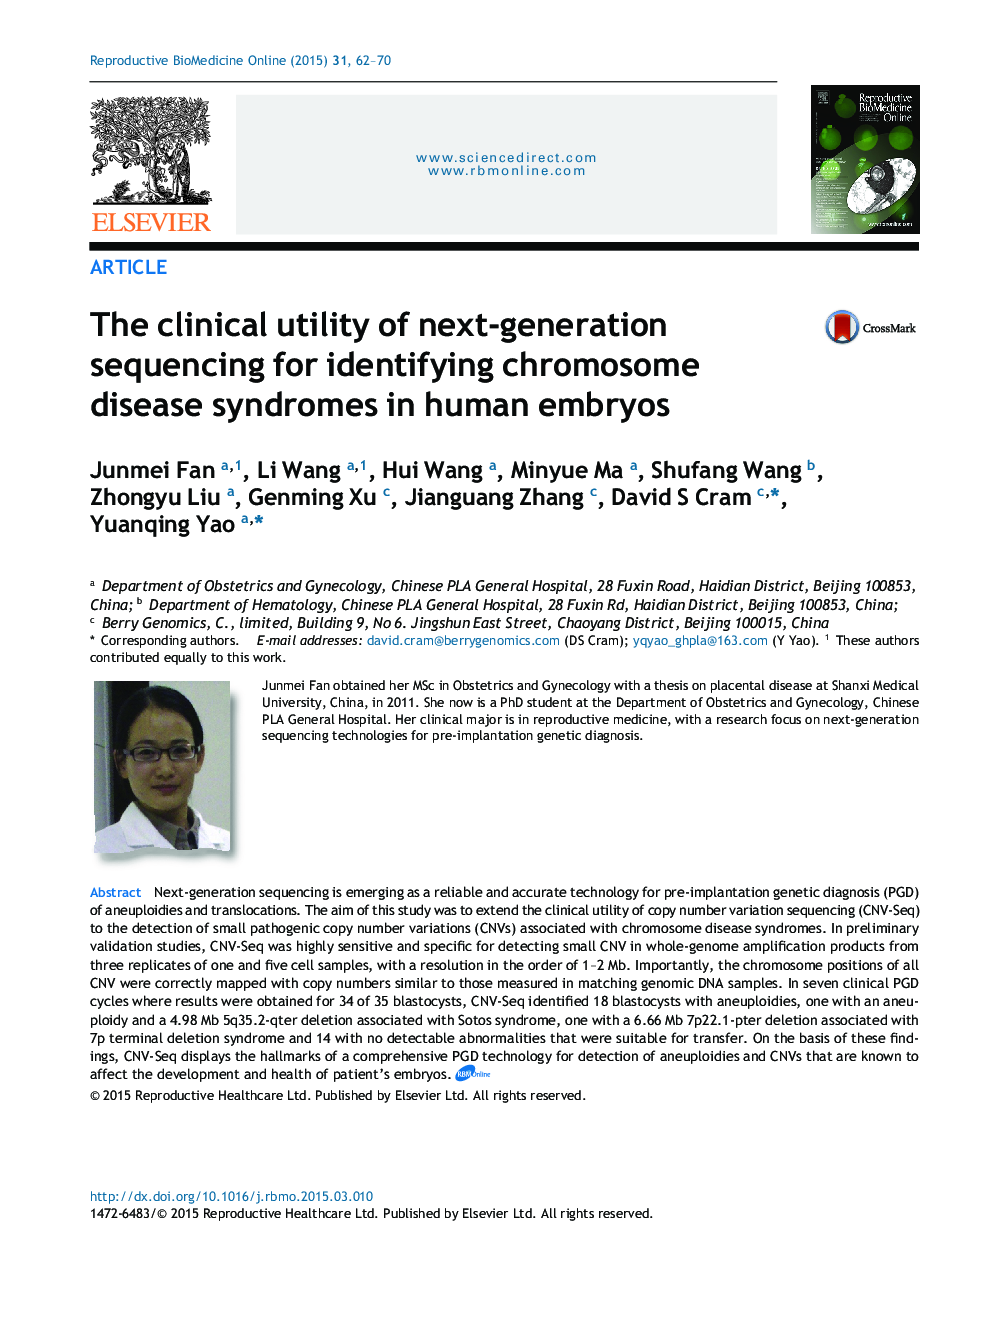 The clinical utility of next-generation sequencing for identifying chromosome disease syndromes in human embryos